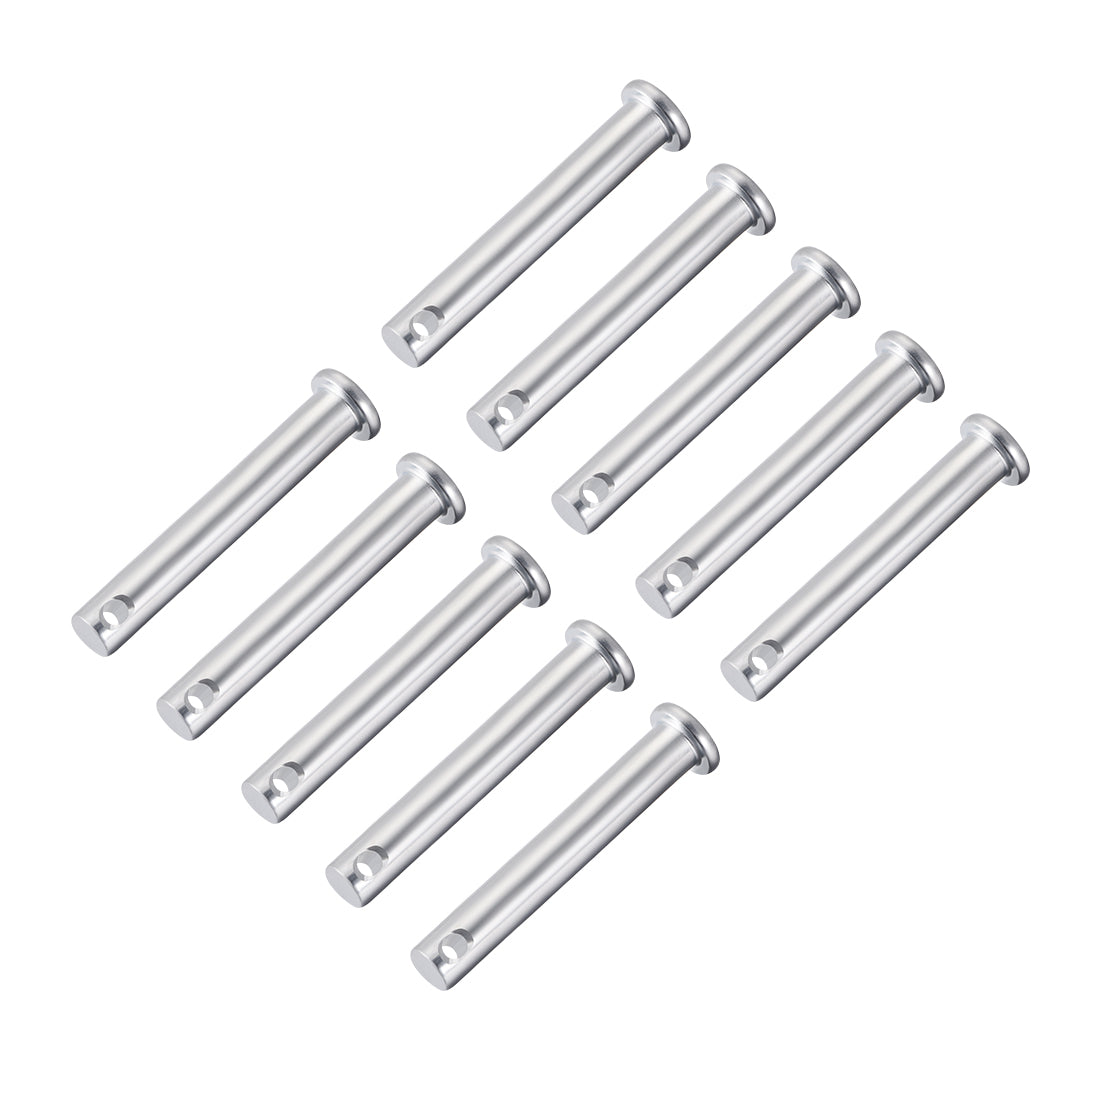 uxcell Uxcell Single Hole Clevis Pins, Flat Head Zinc-Plating Steel